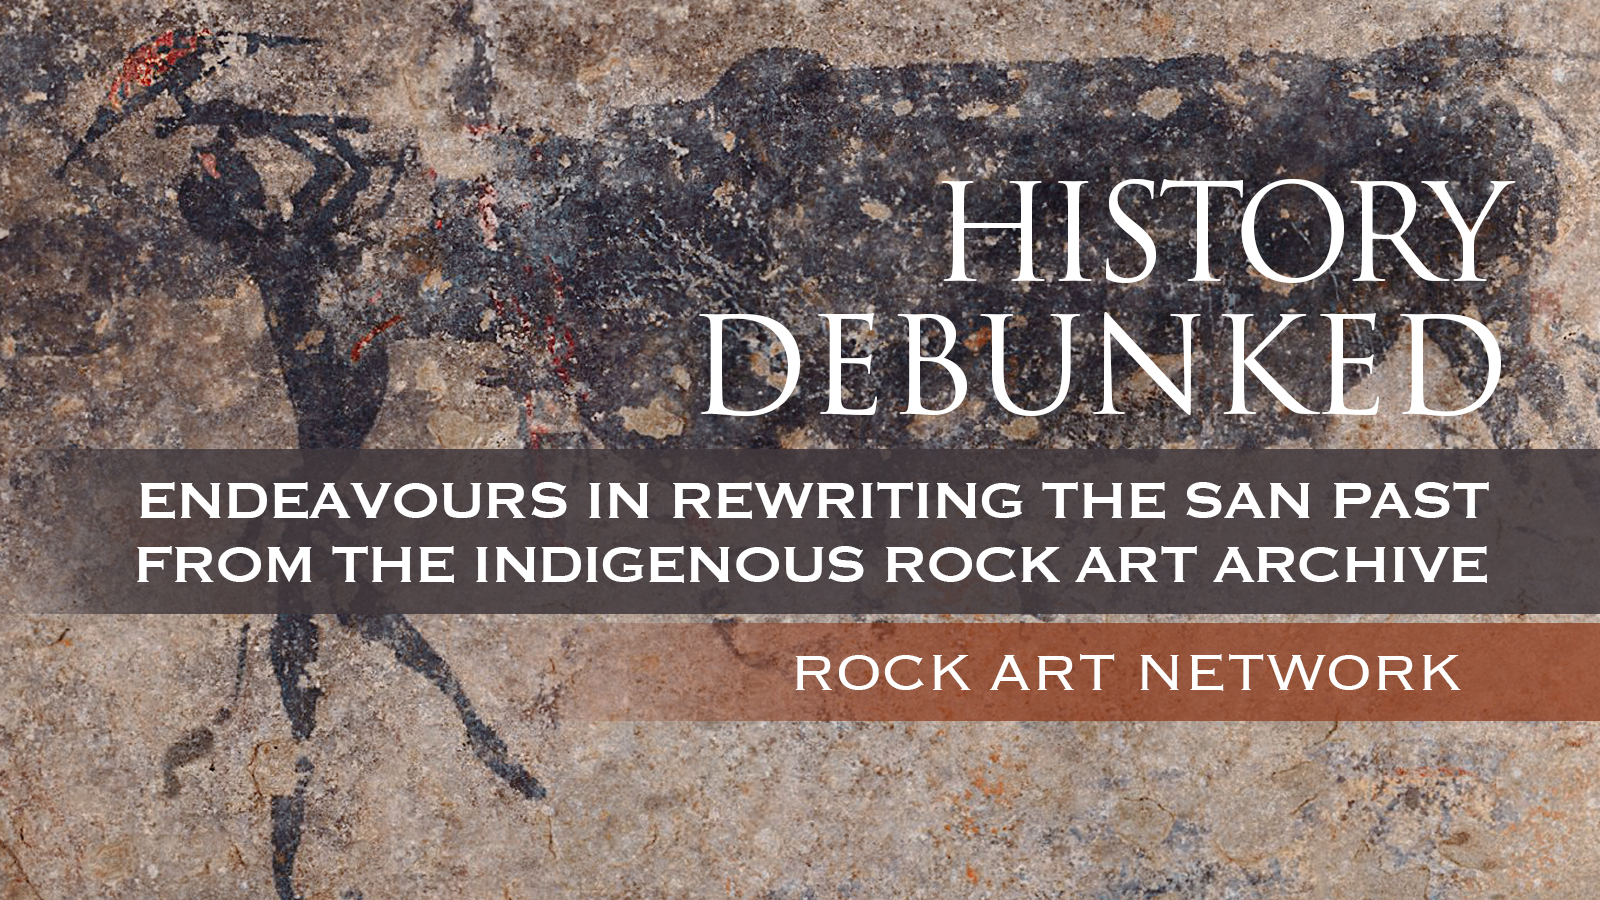 History debunked: Endeavours in rewriting the San past from the Indigenous rock art archive